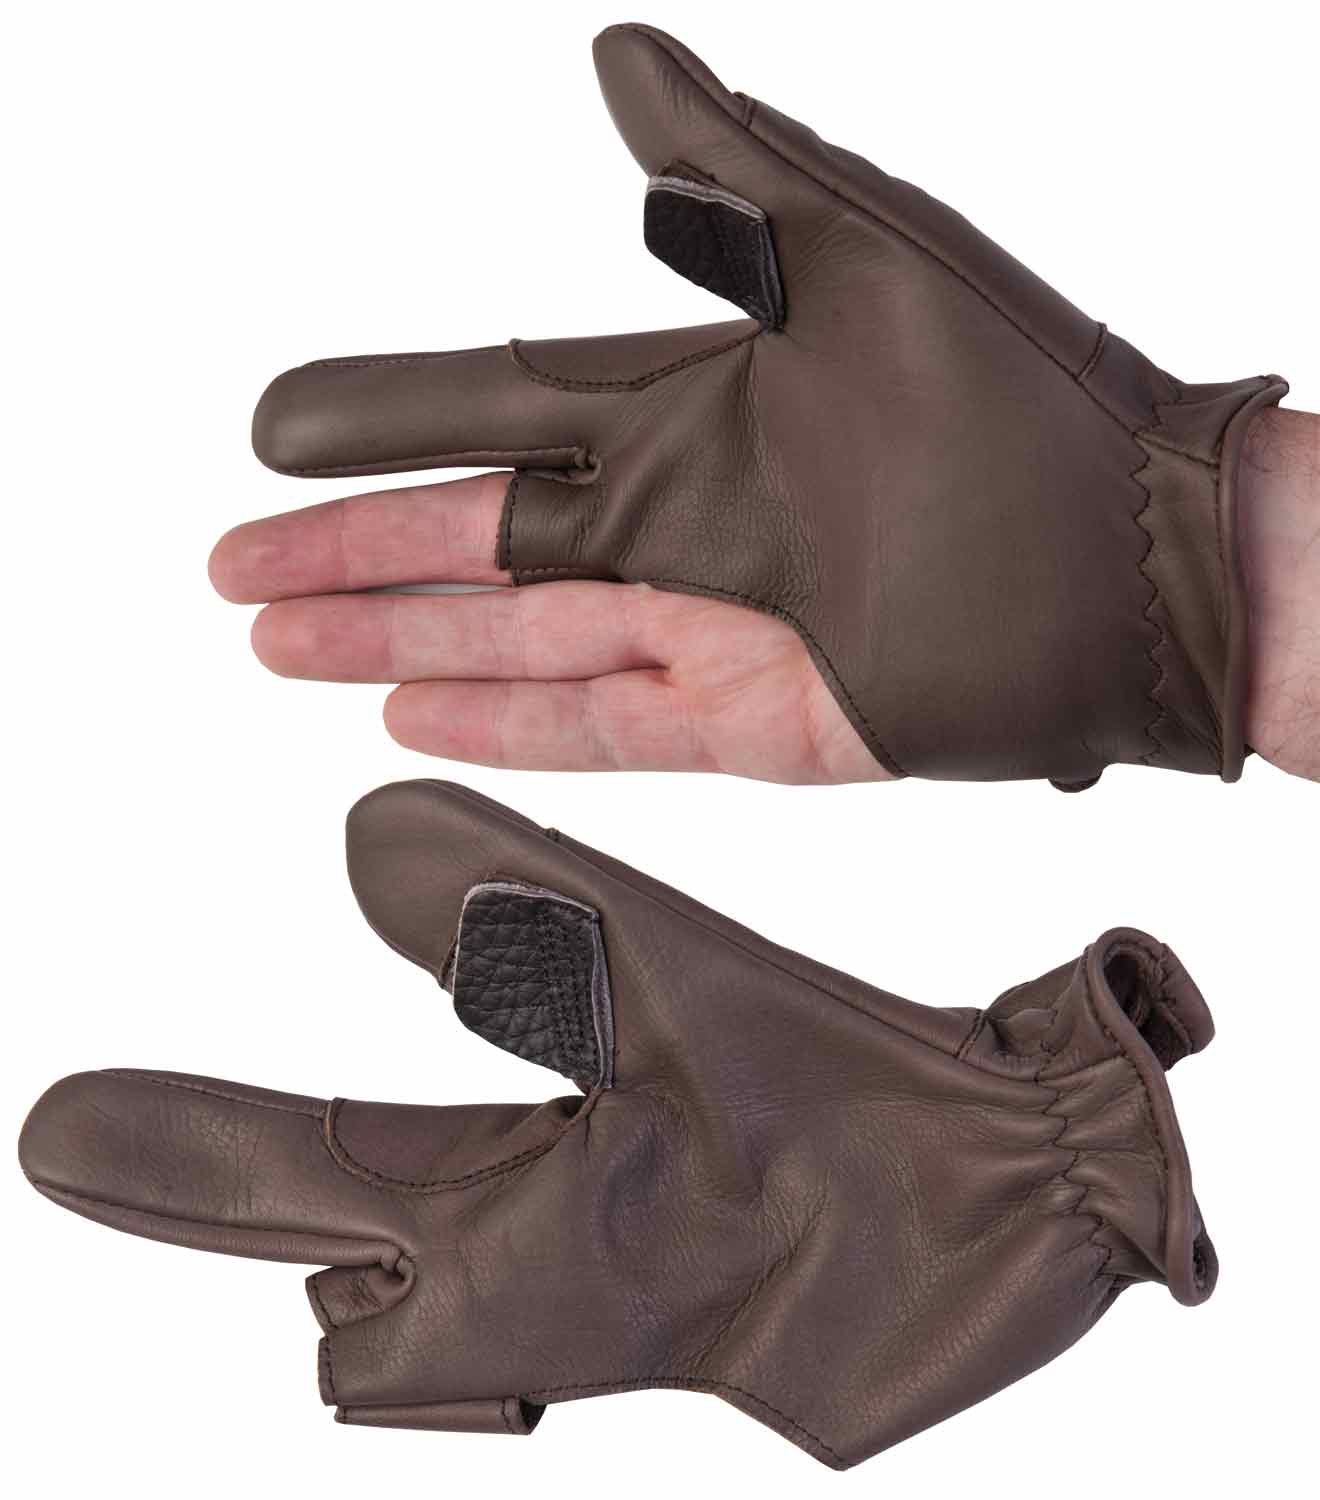 2 FINGER ARCHERY BOW GLOVES SHOOTING AND HUNTING GLOVES BROWN LEATHER 